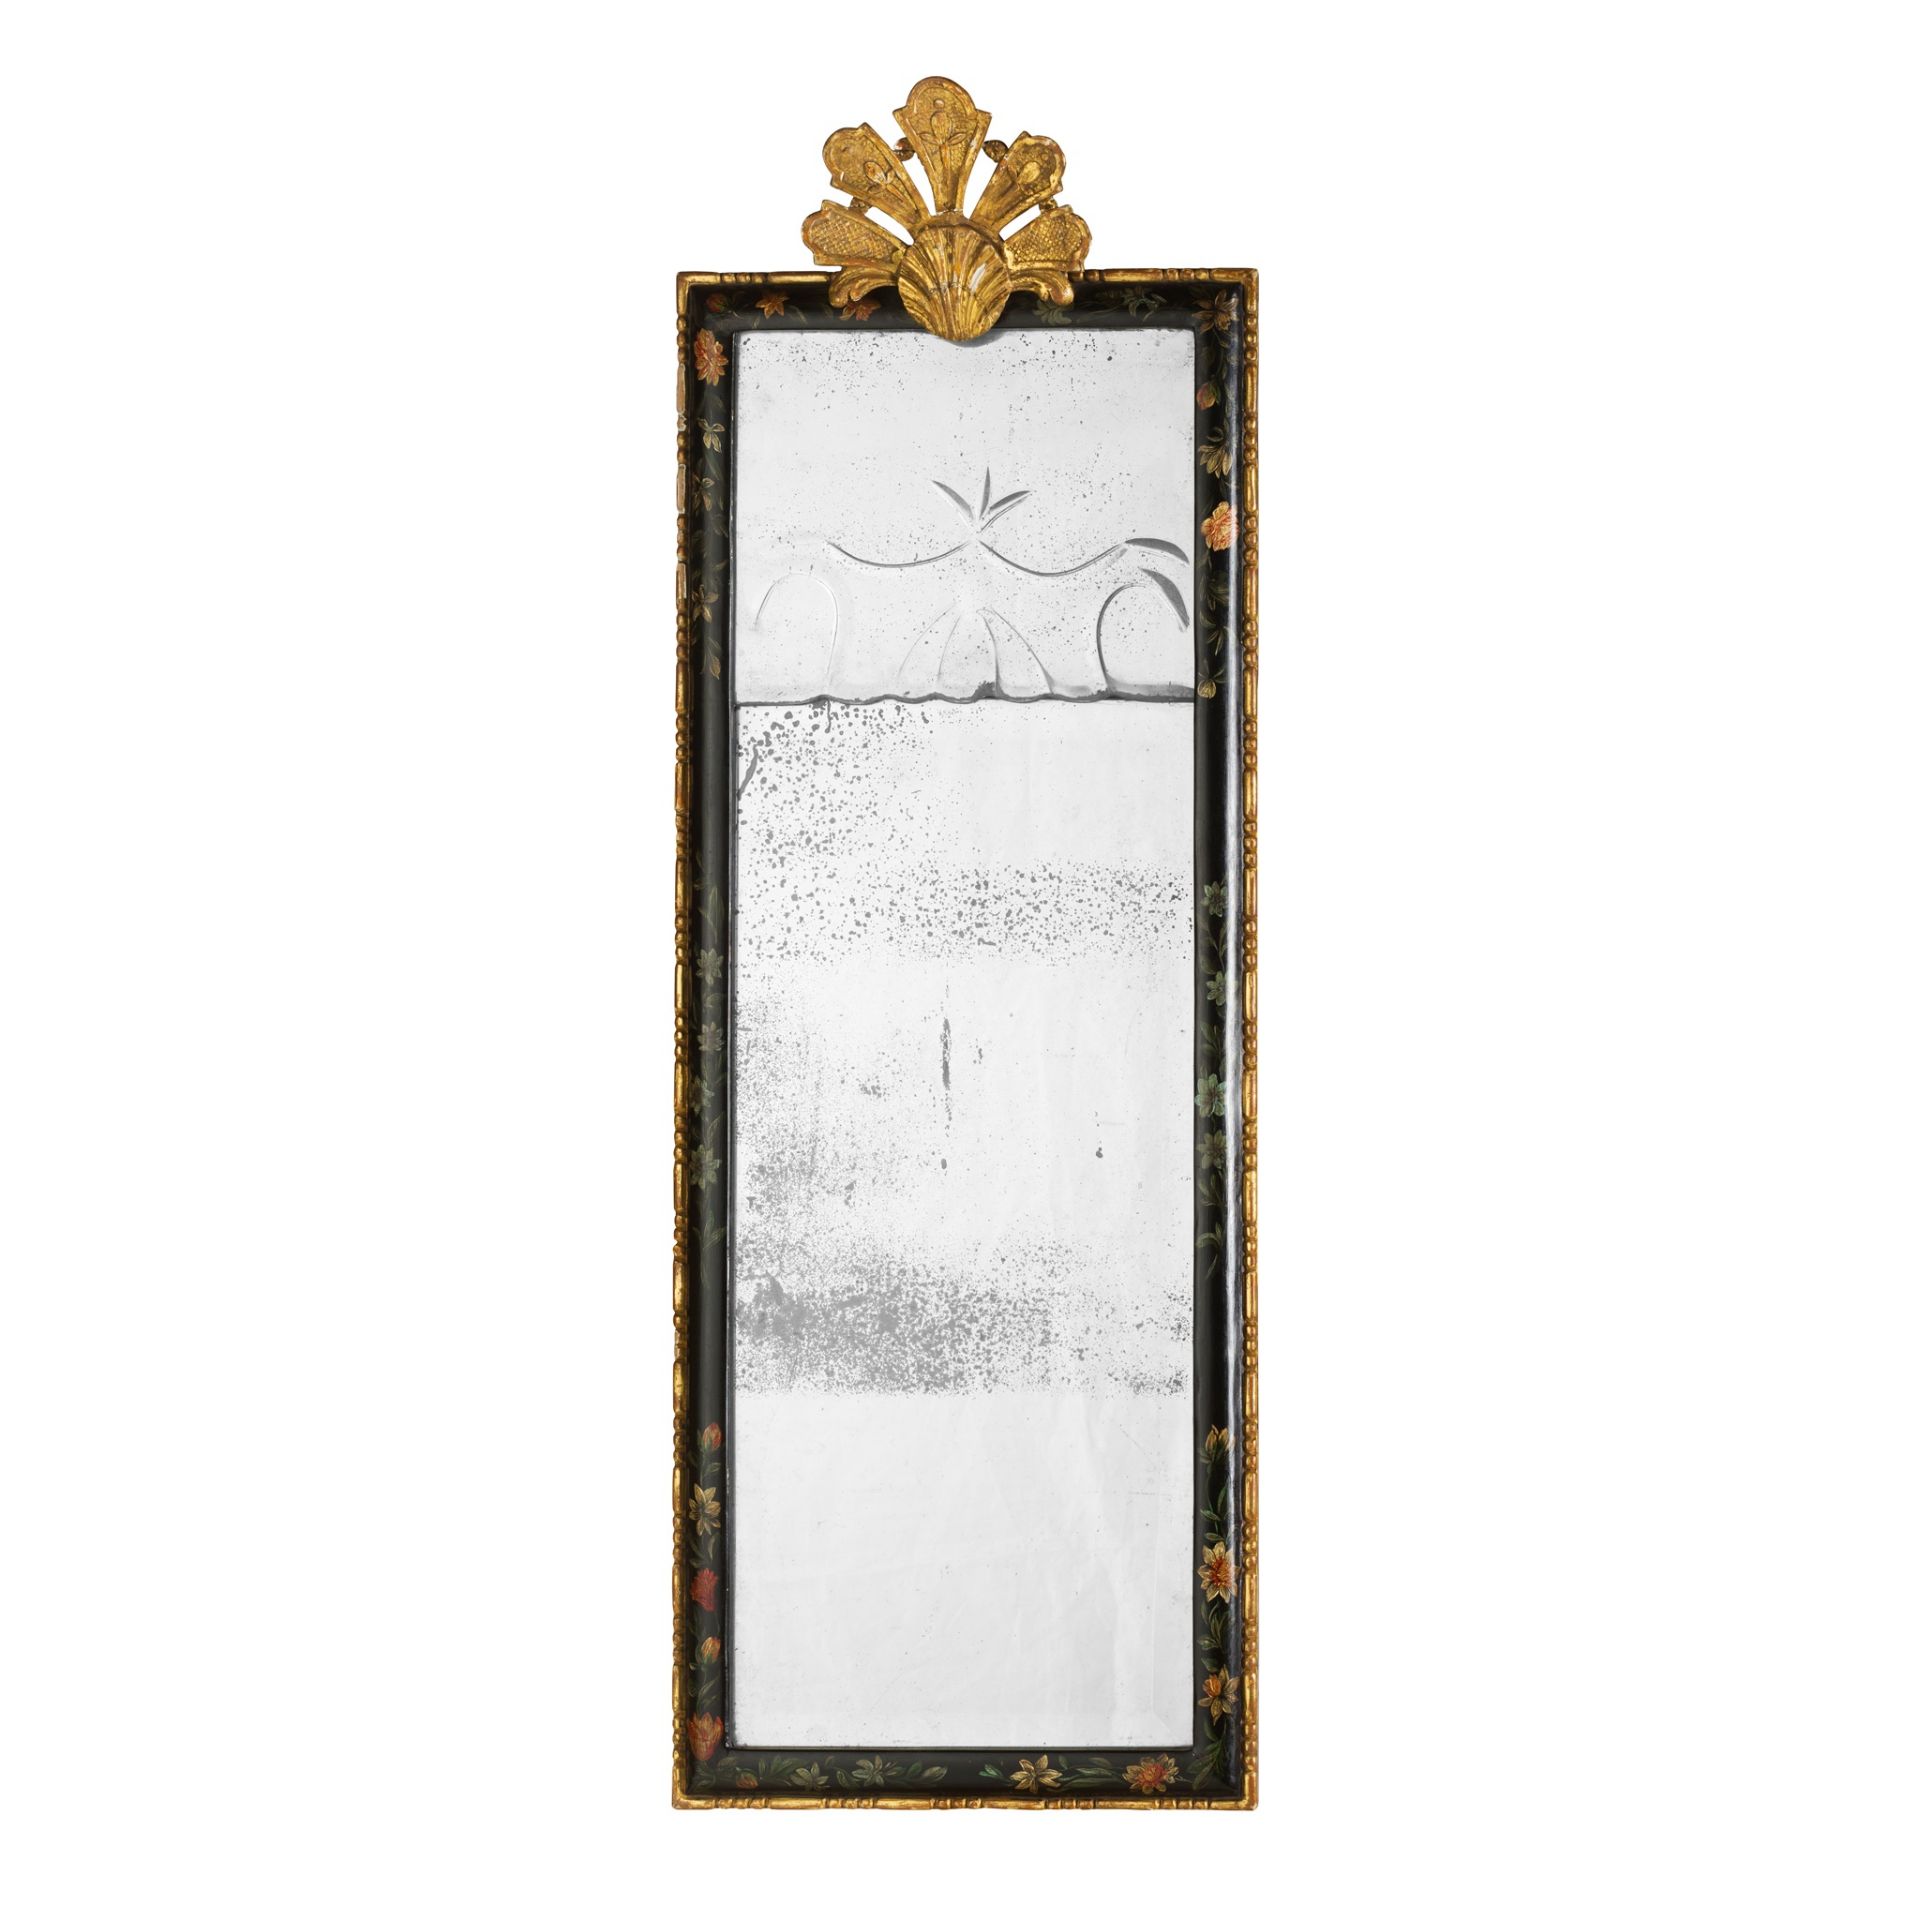 WILLIAM AND MARY SMALL EBONISED AND GILT MIRROR EARLY 19TH CENTURY